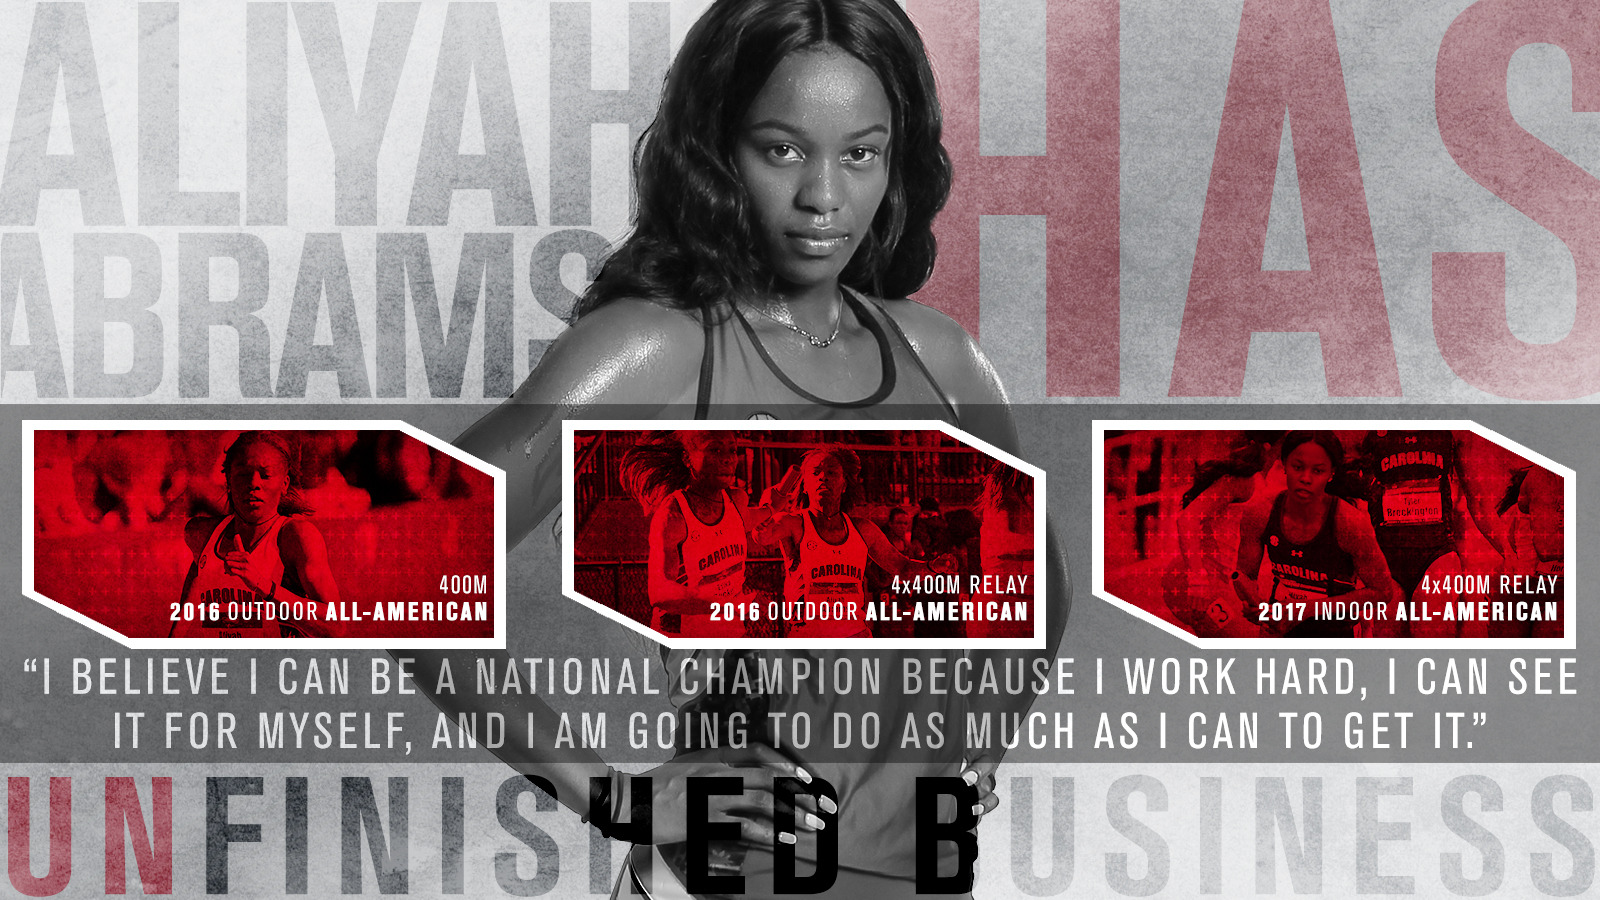 Unfinished Business: Aliyah Abrams